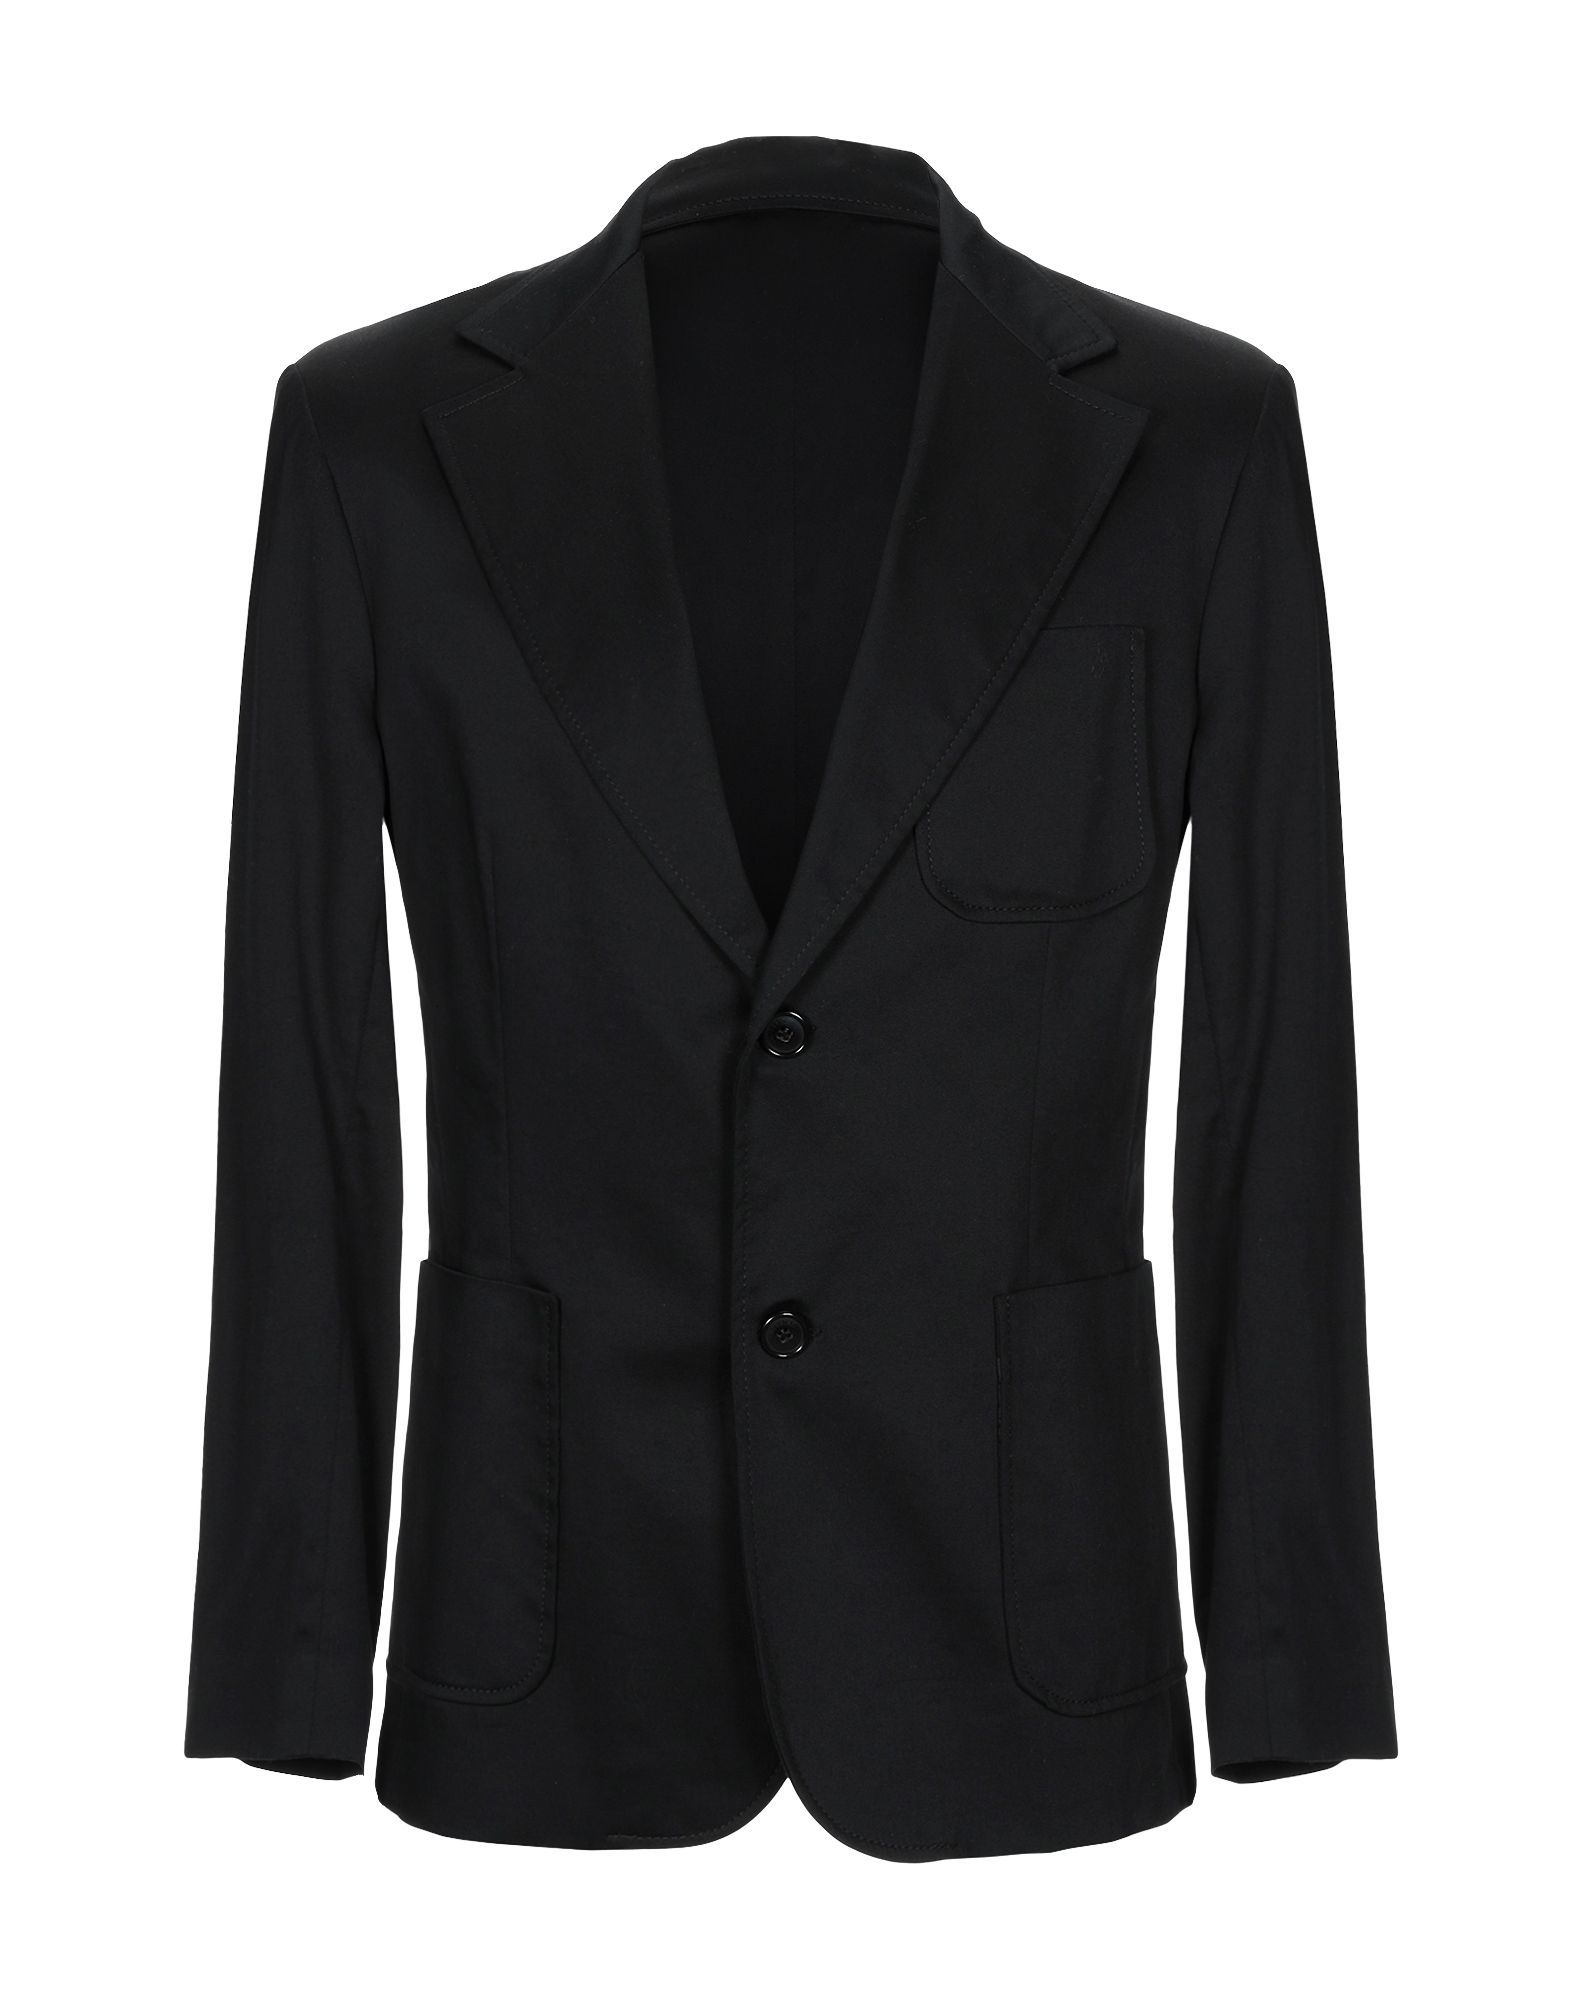 SUITS AND JACKETS Imperial Black Man Cotton